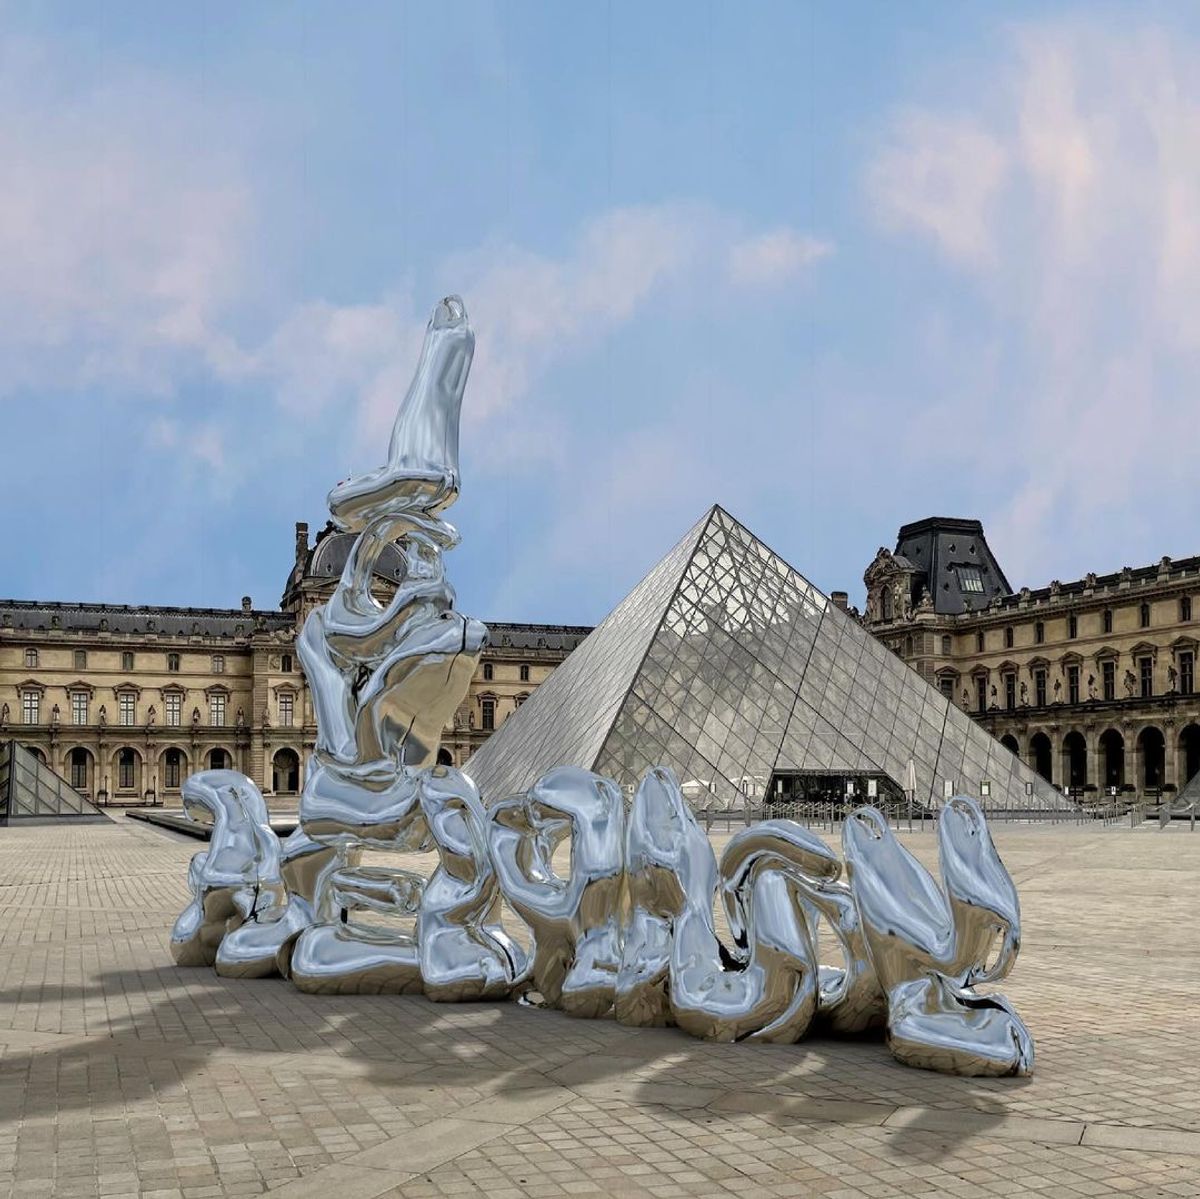 Andy Picci's digital work Love Yourself, visible by using a smartphone near the Louvre pyramid in Paris, is part of CADAF's Digital Art Month Image: Andy Picci